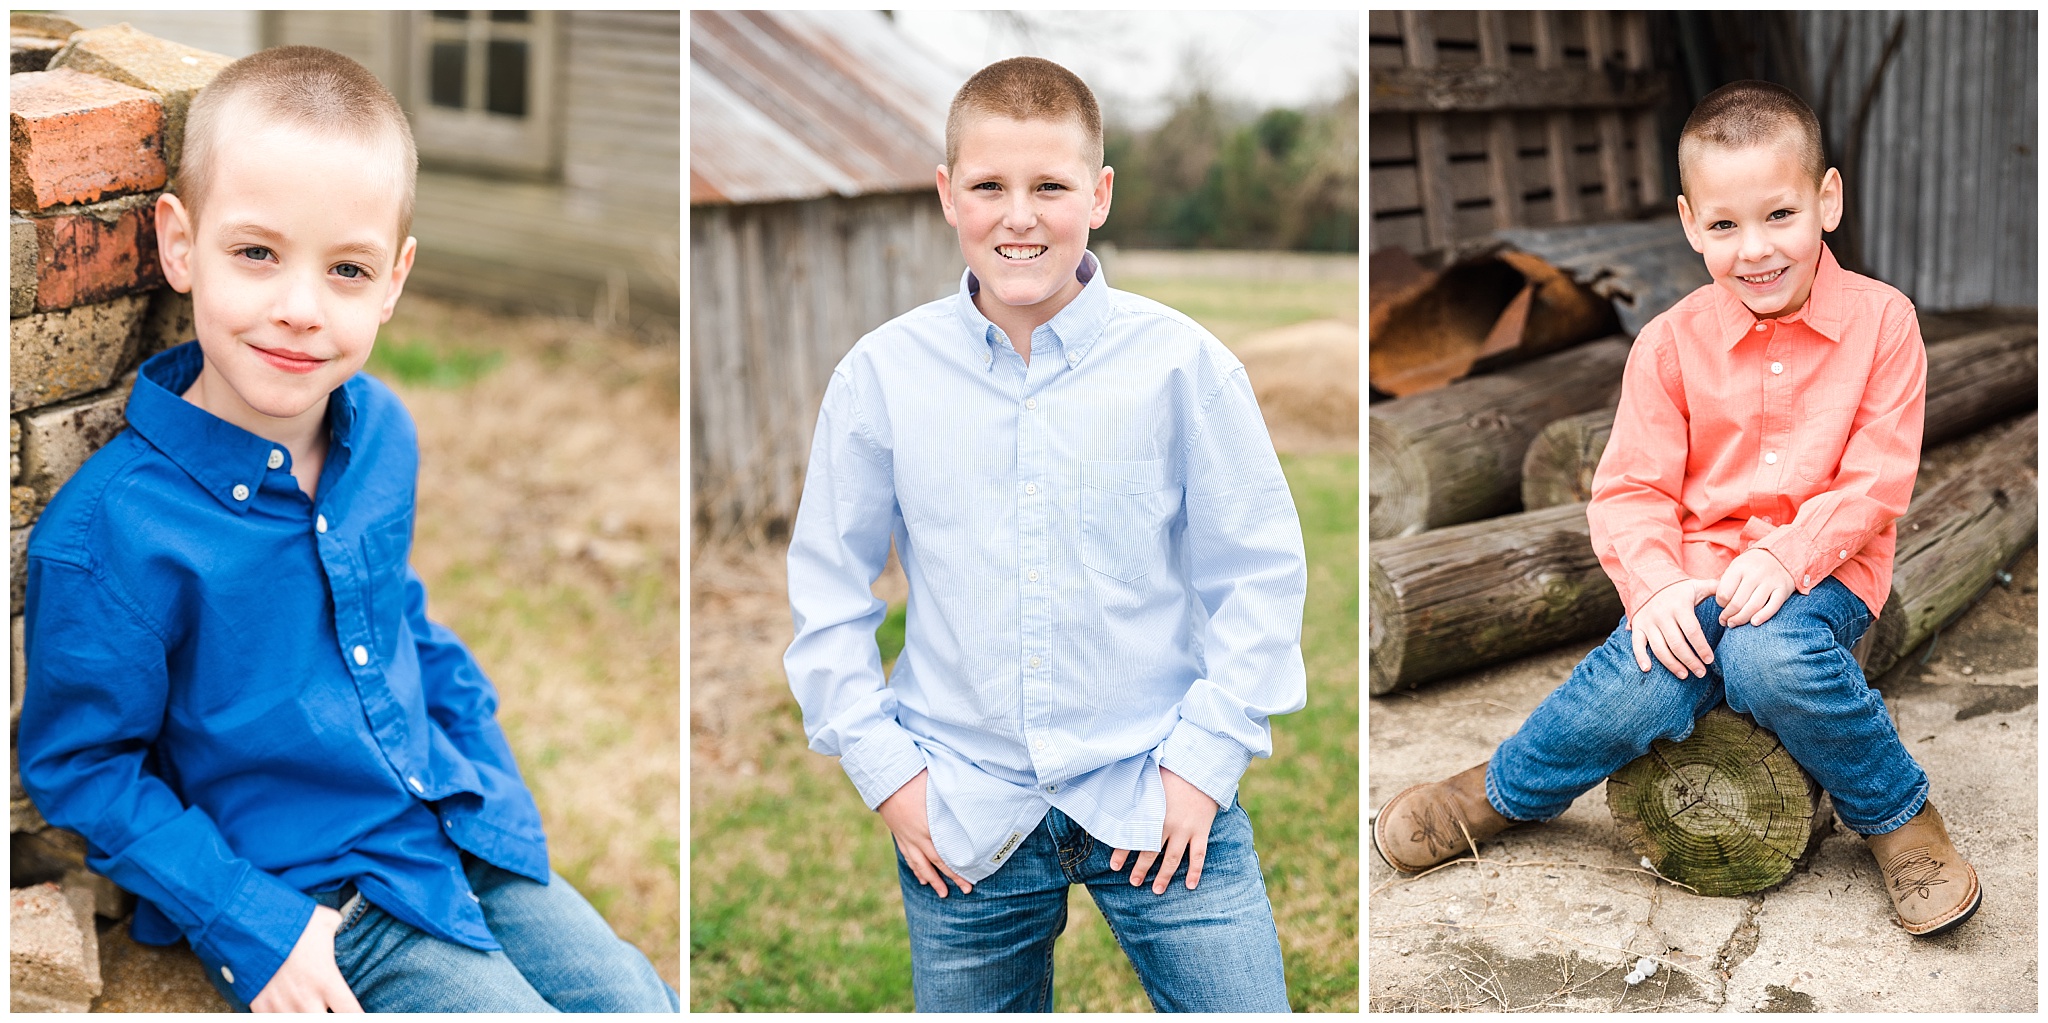 Small Town Texas Family Photography Session_2017-02-12_0001